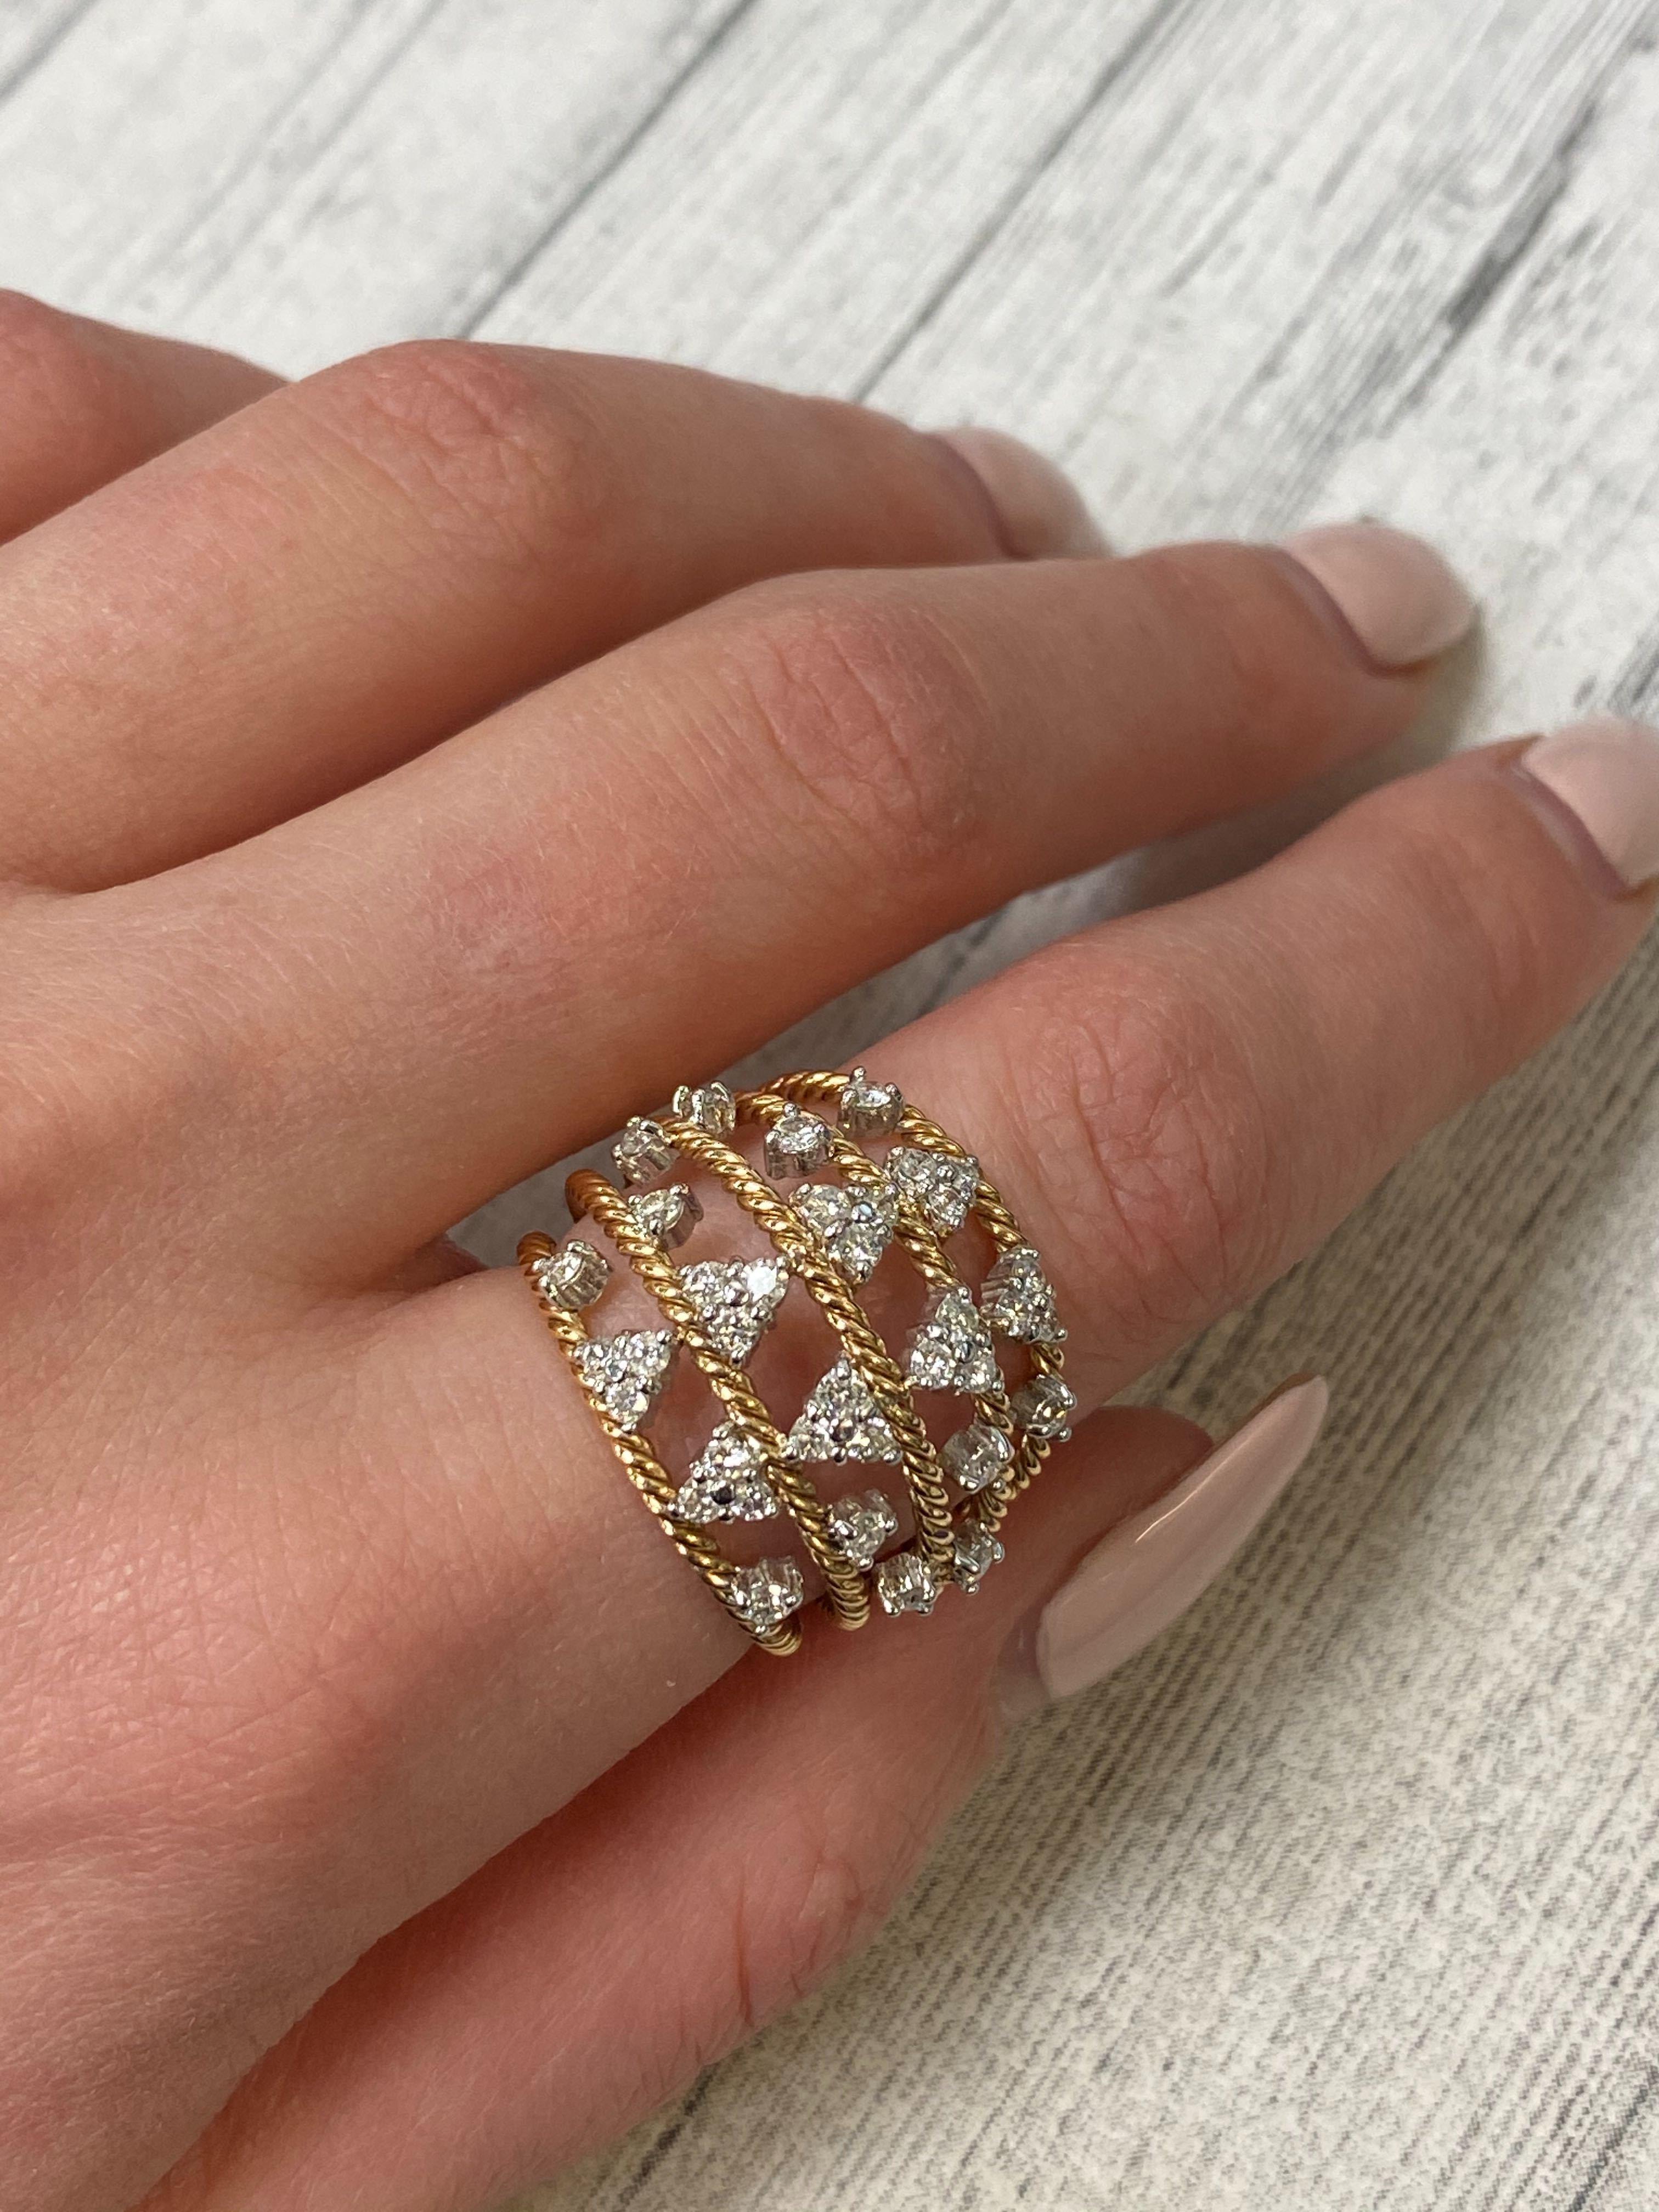 Rachel Koen Diamond Cocktail Ring 18K Rose and White Gold 1.00cttw In New Condition For Sale In New York, NY